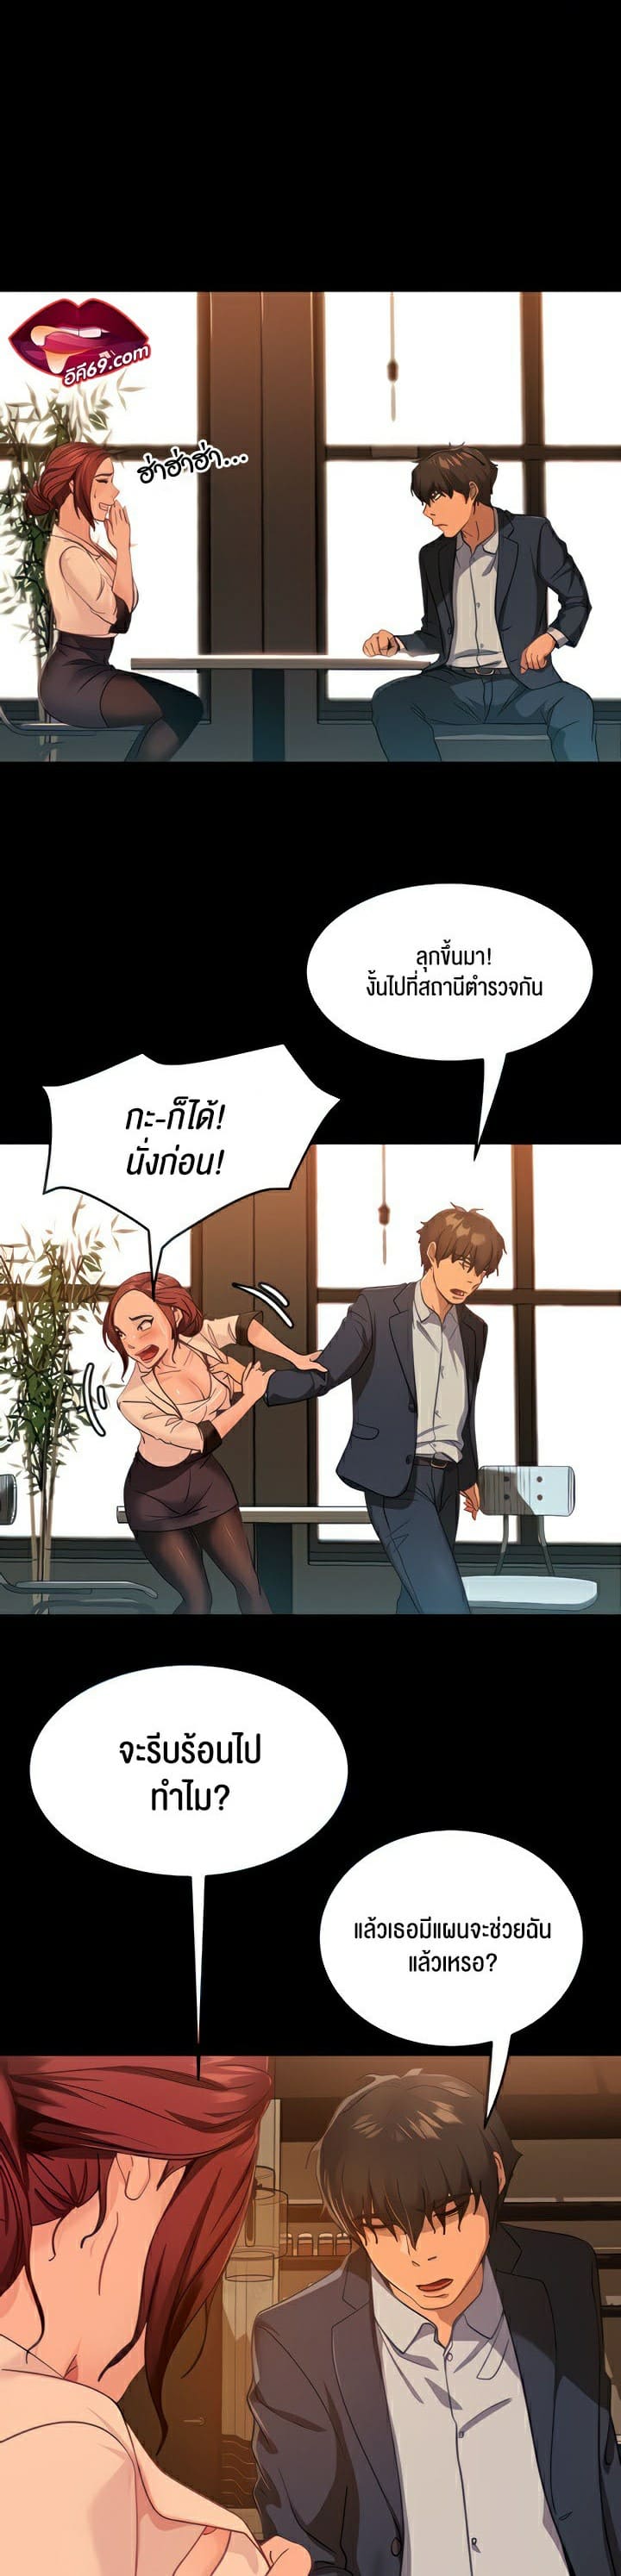 Marriage Agency Review ตอนที่ 3 ภาพ 11